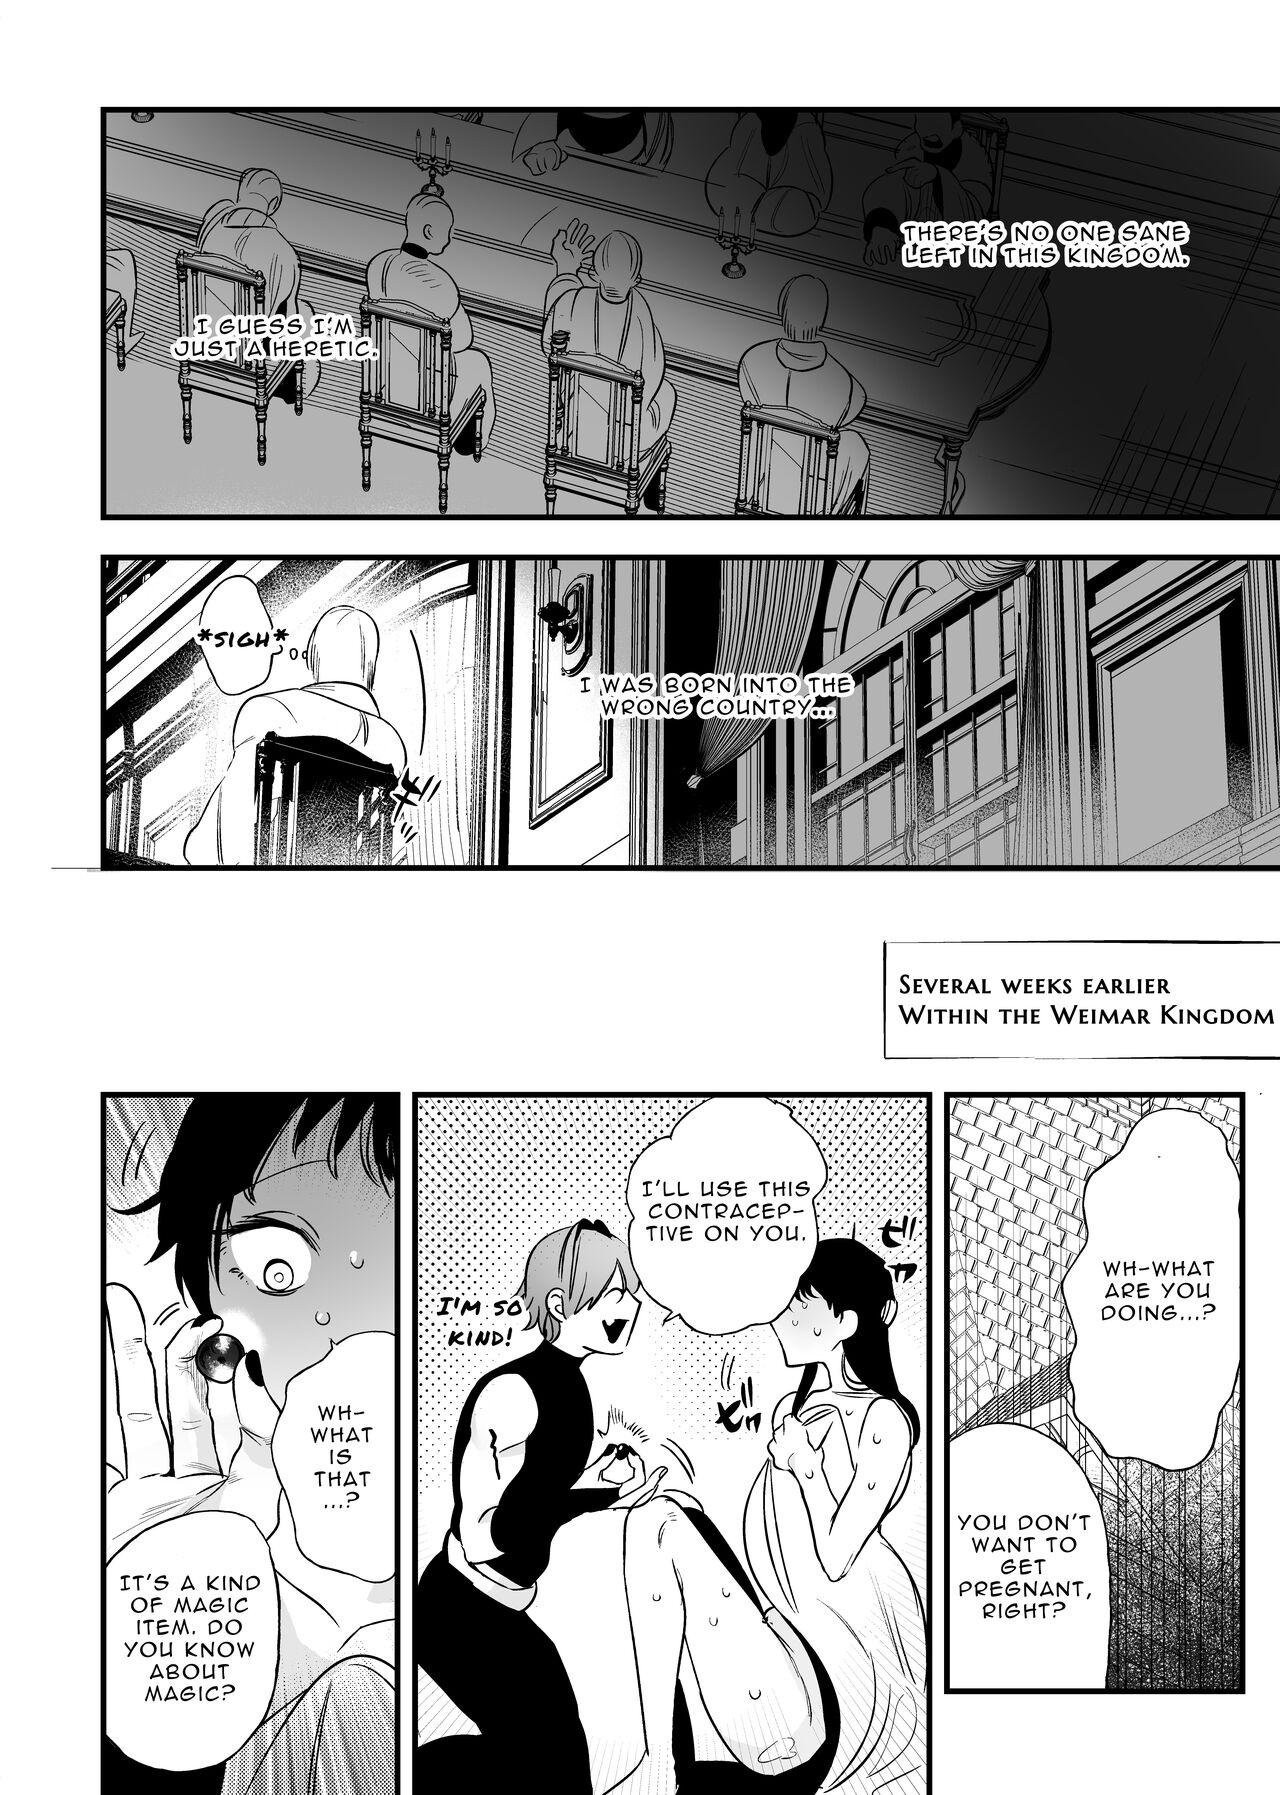 Lesbiansex The Man Who Saved Me on my Isekai Trip was a Killer... 2 - Original This - Page 8